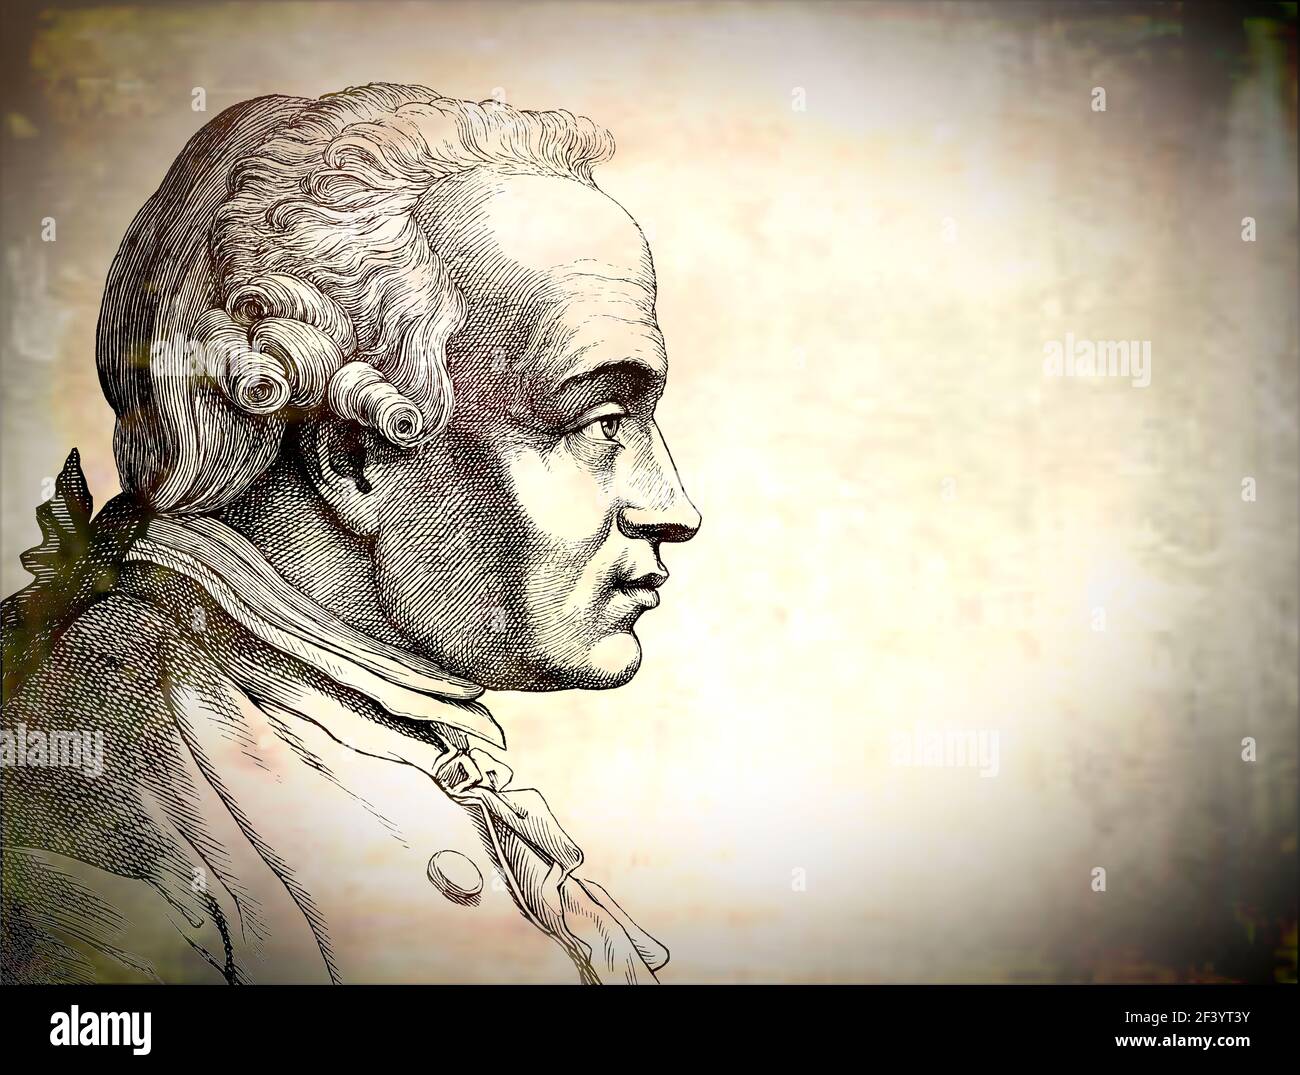 Immanuel Kant, 1724 - 1804, German philosopher of the Enlightenment Stock Photo